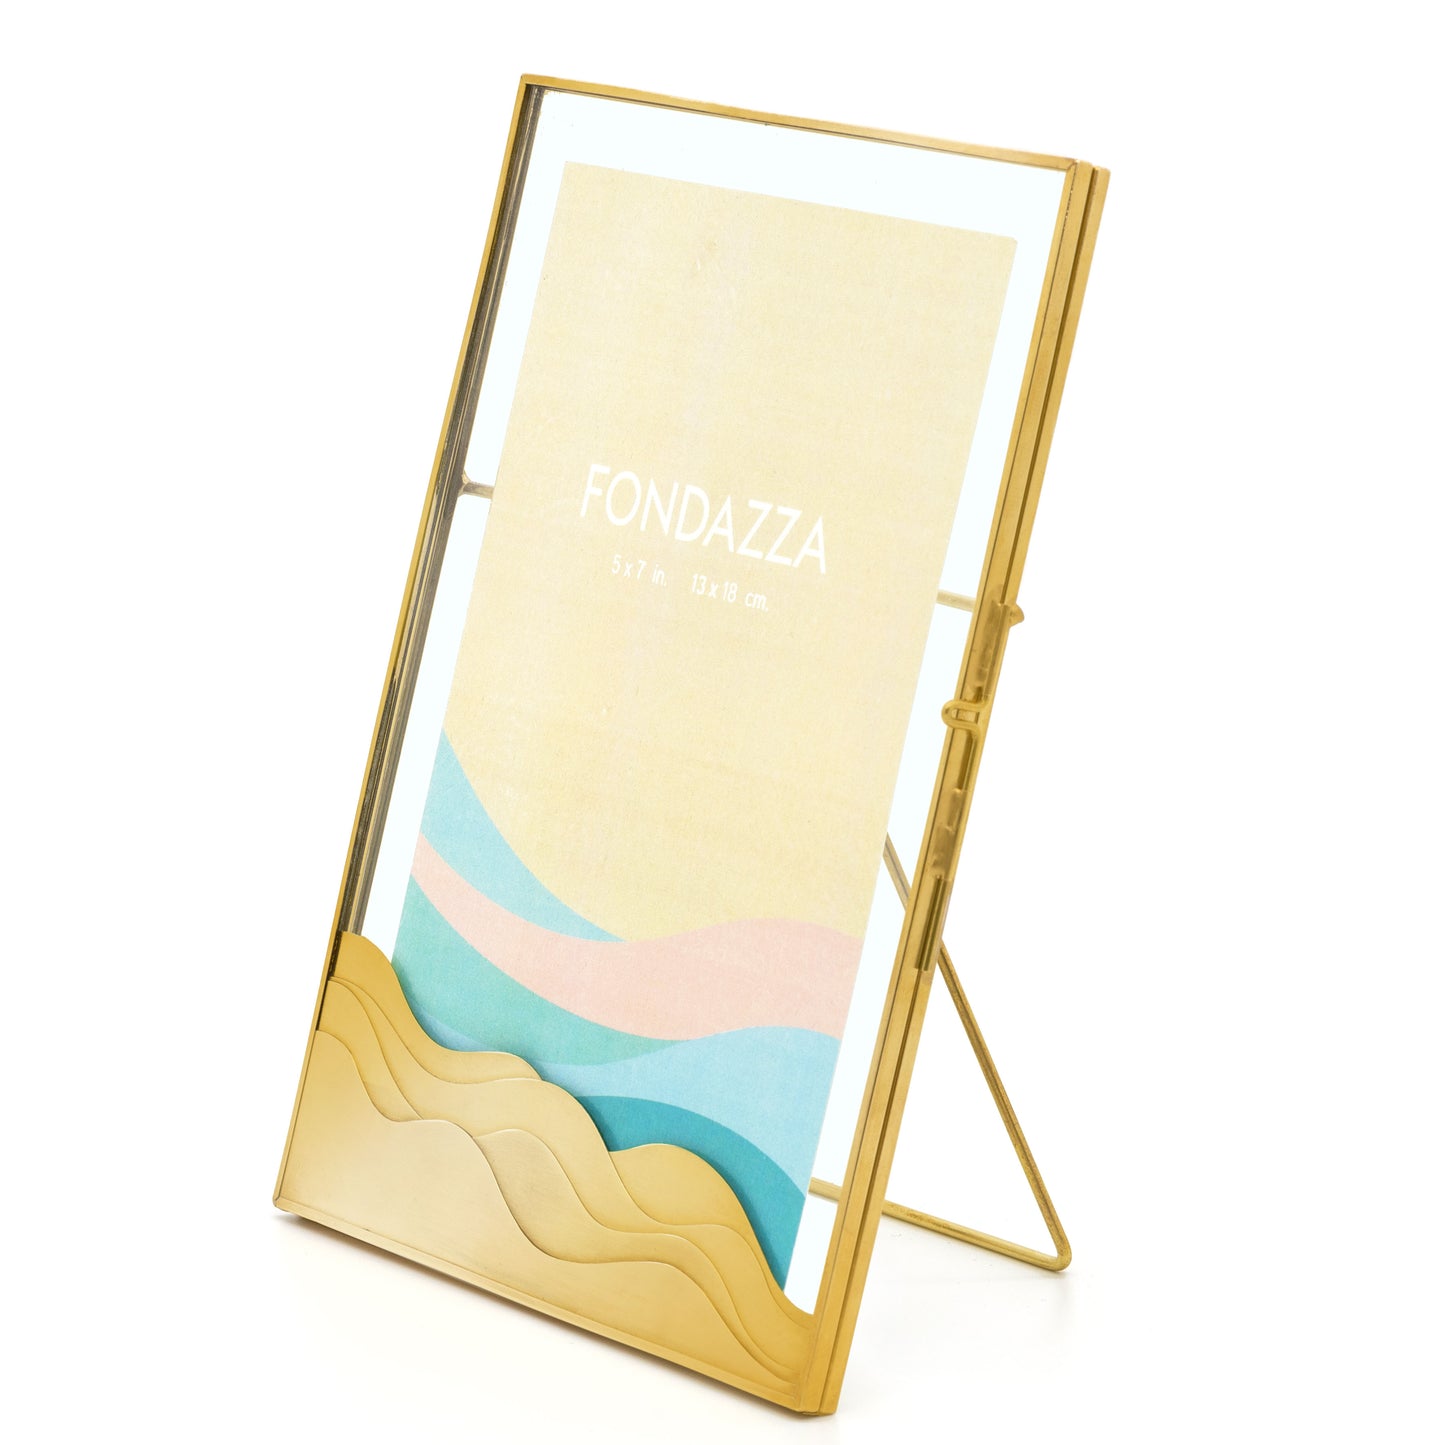 gold picture frames - unique and modern wave design -The most beautiful Home furnishing and home accents at FONDAZZA.